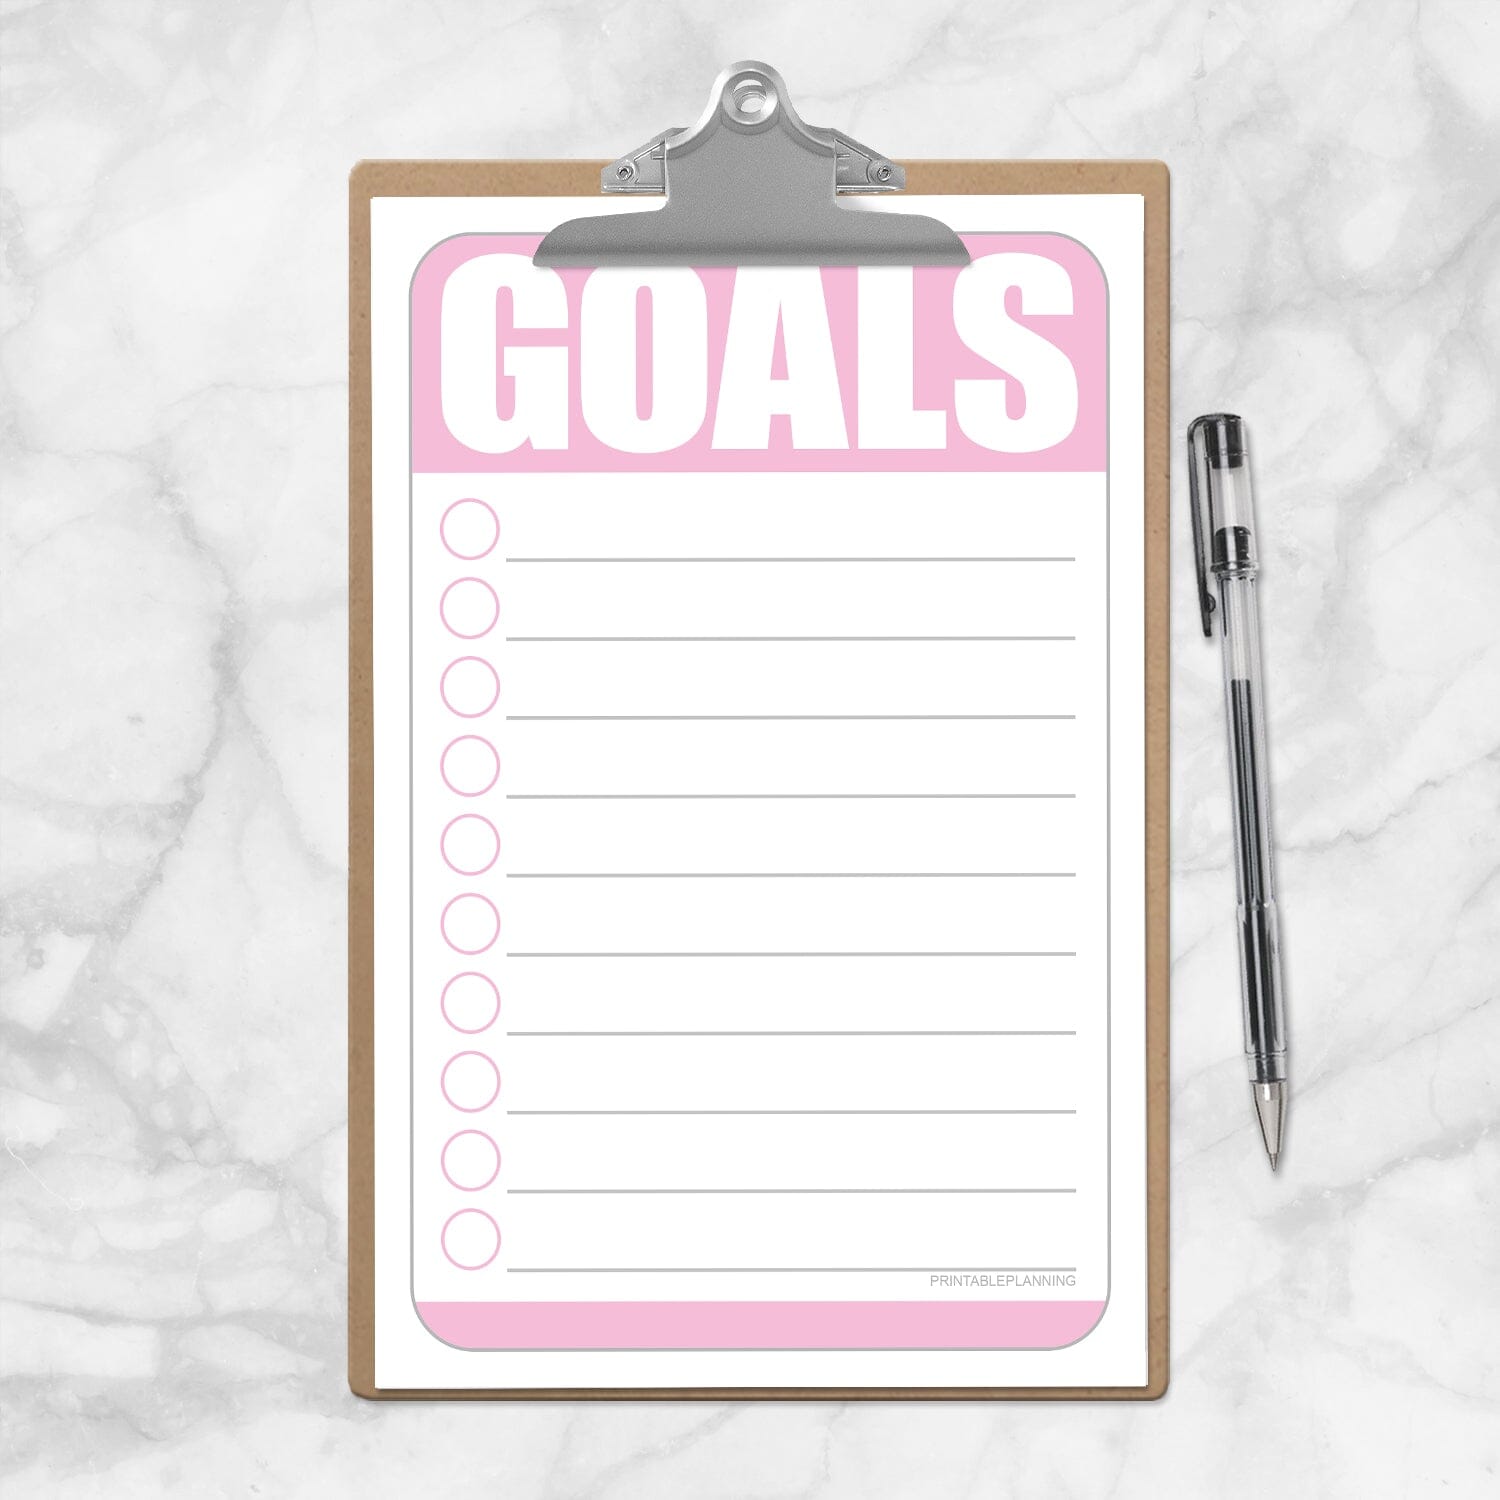 Printable Goals - Pink Half Page Checklist at Printable Planning. Photo shows the half size sheet on a mini clipboard.